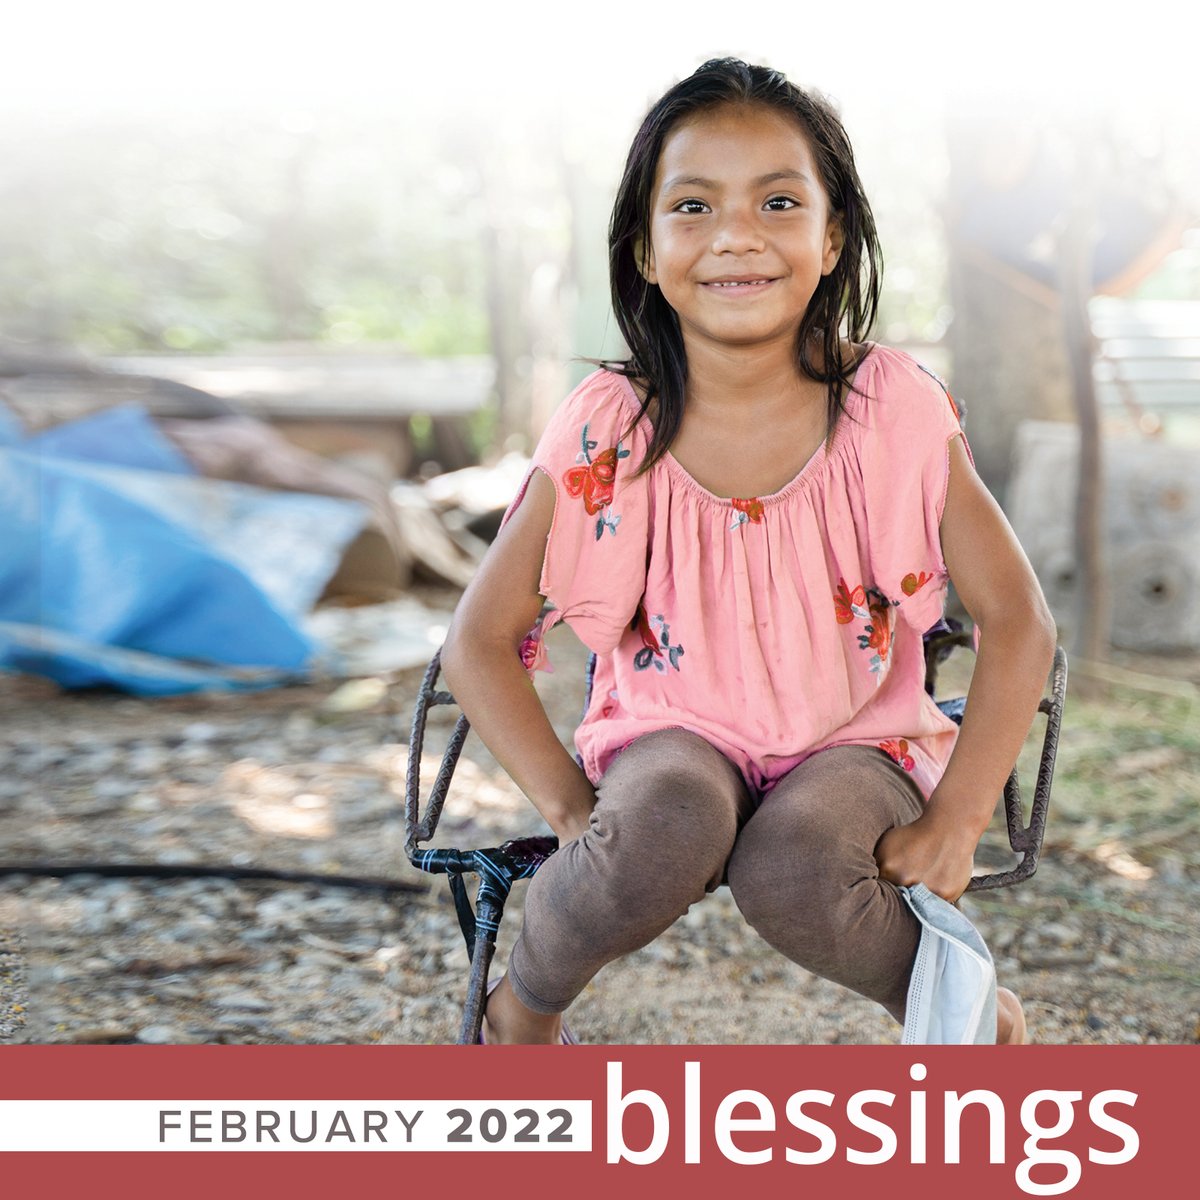 Check out this month's issue of Blessings Magazine featuring incredible stories from #Haiti, Kenya, #Peru, the United States and more! https://t.co/RYcjbx5Cns https://t.co/9nbJNMPUdU